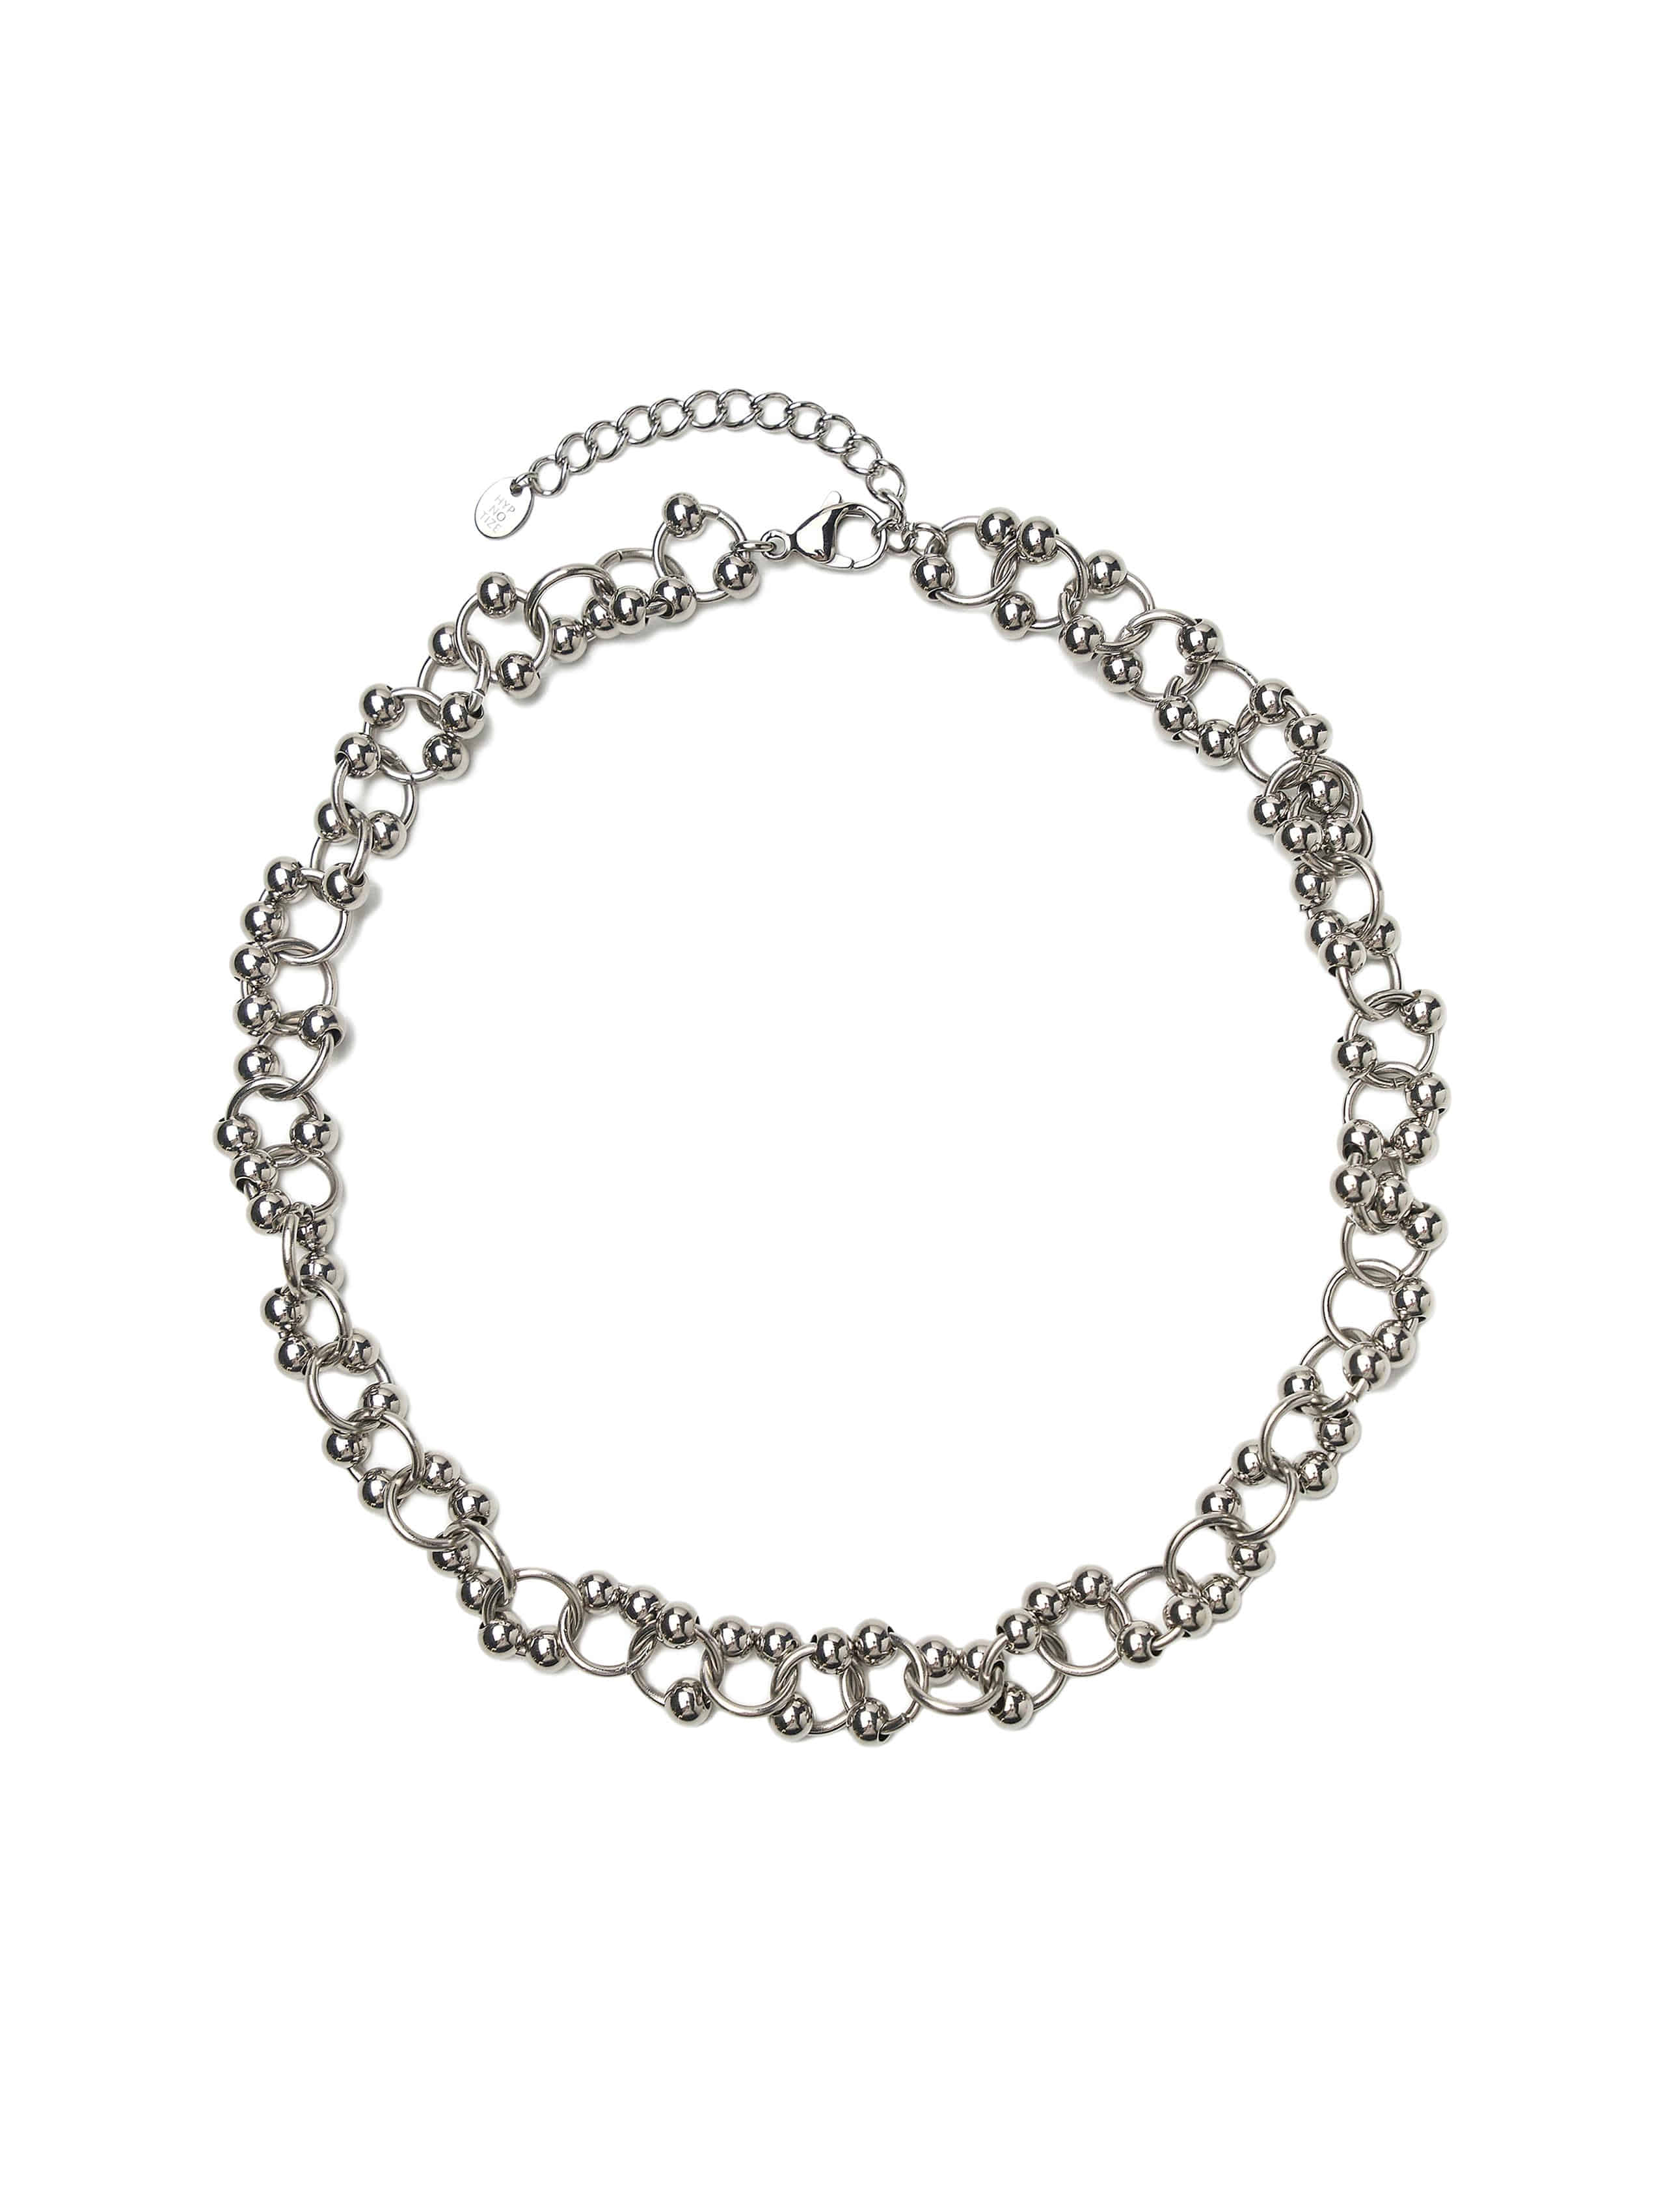 Linked Piercing Chain Necklace